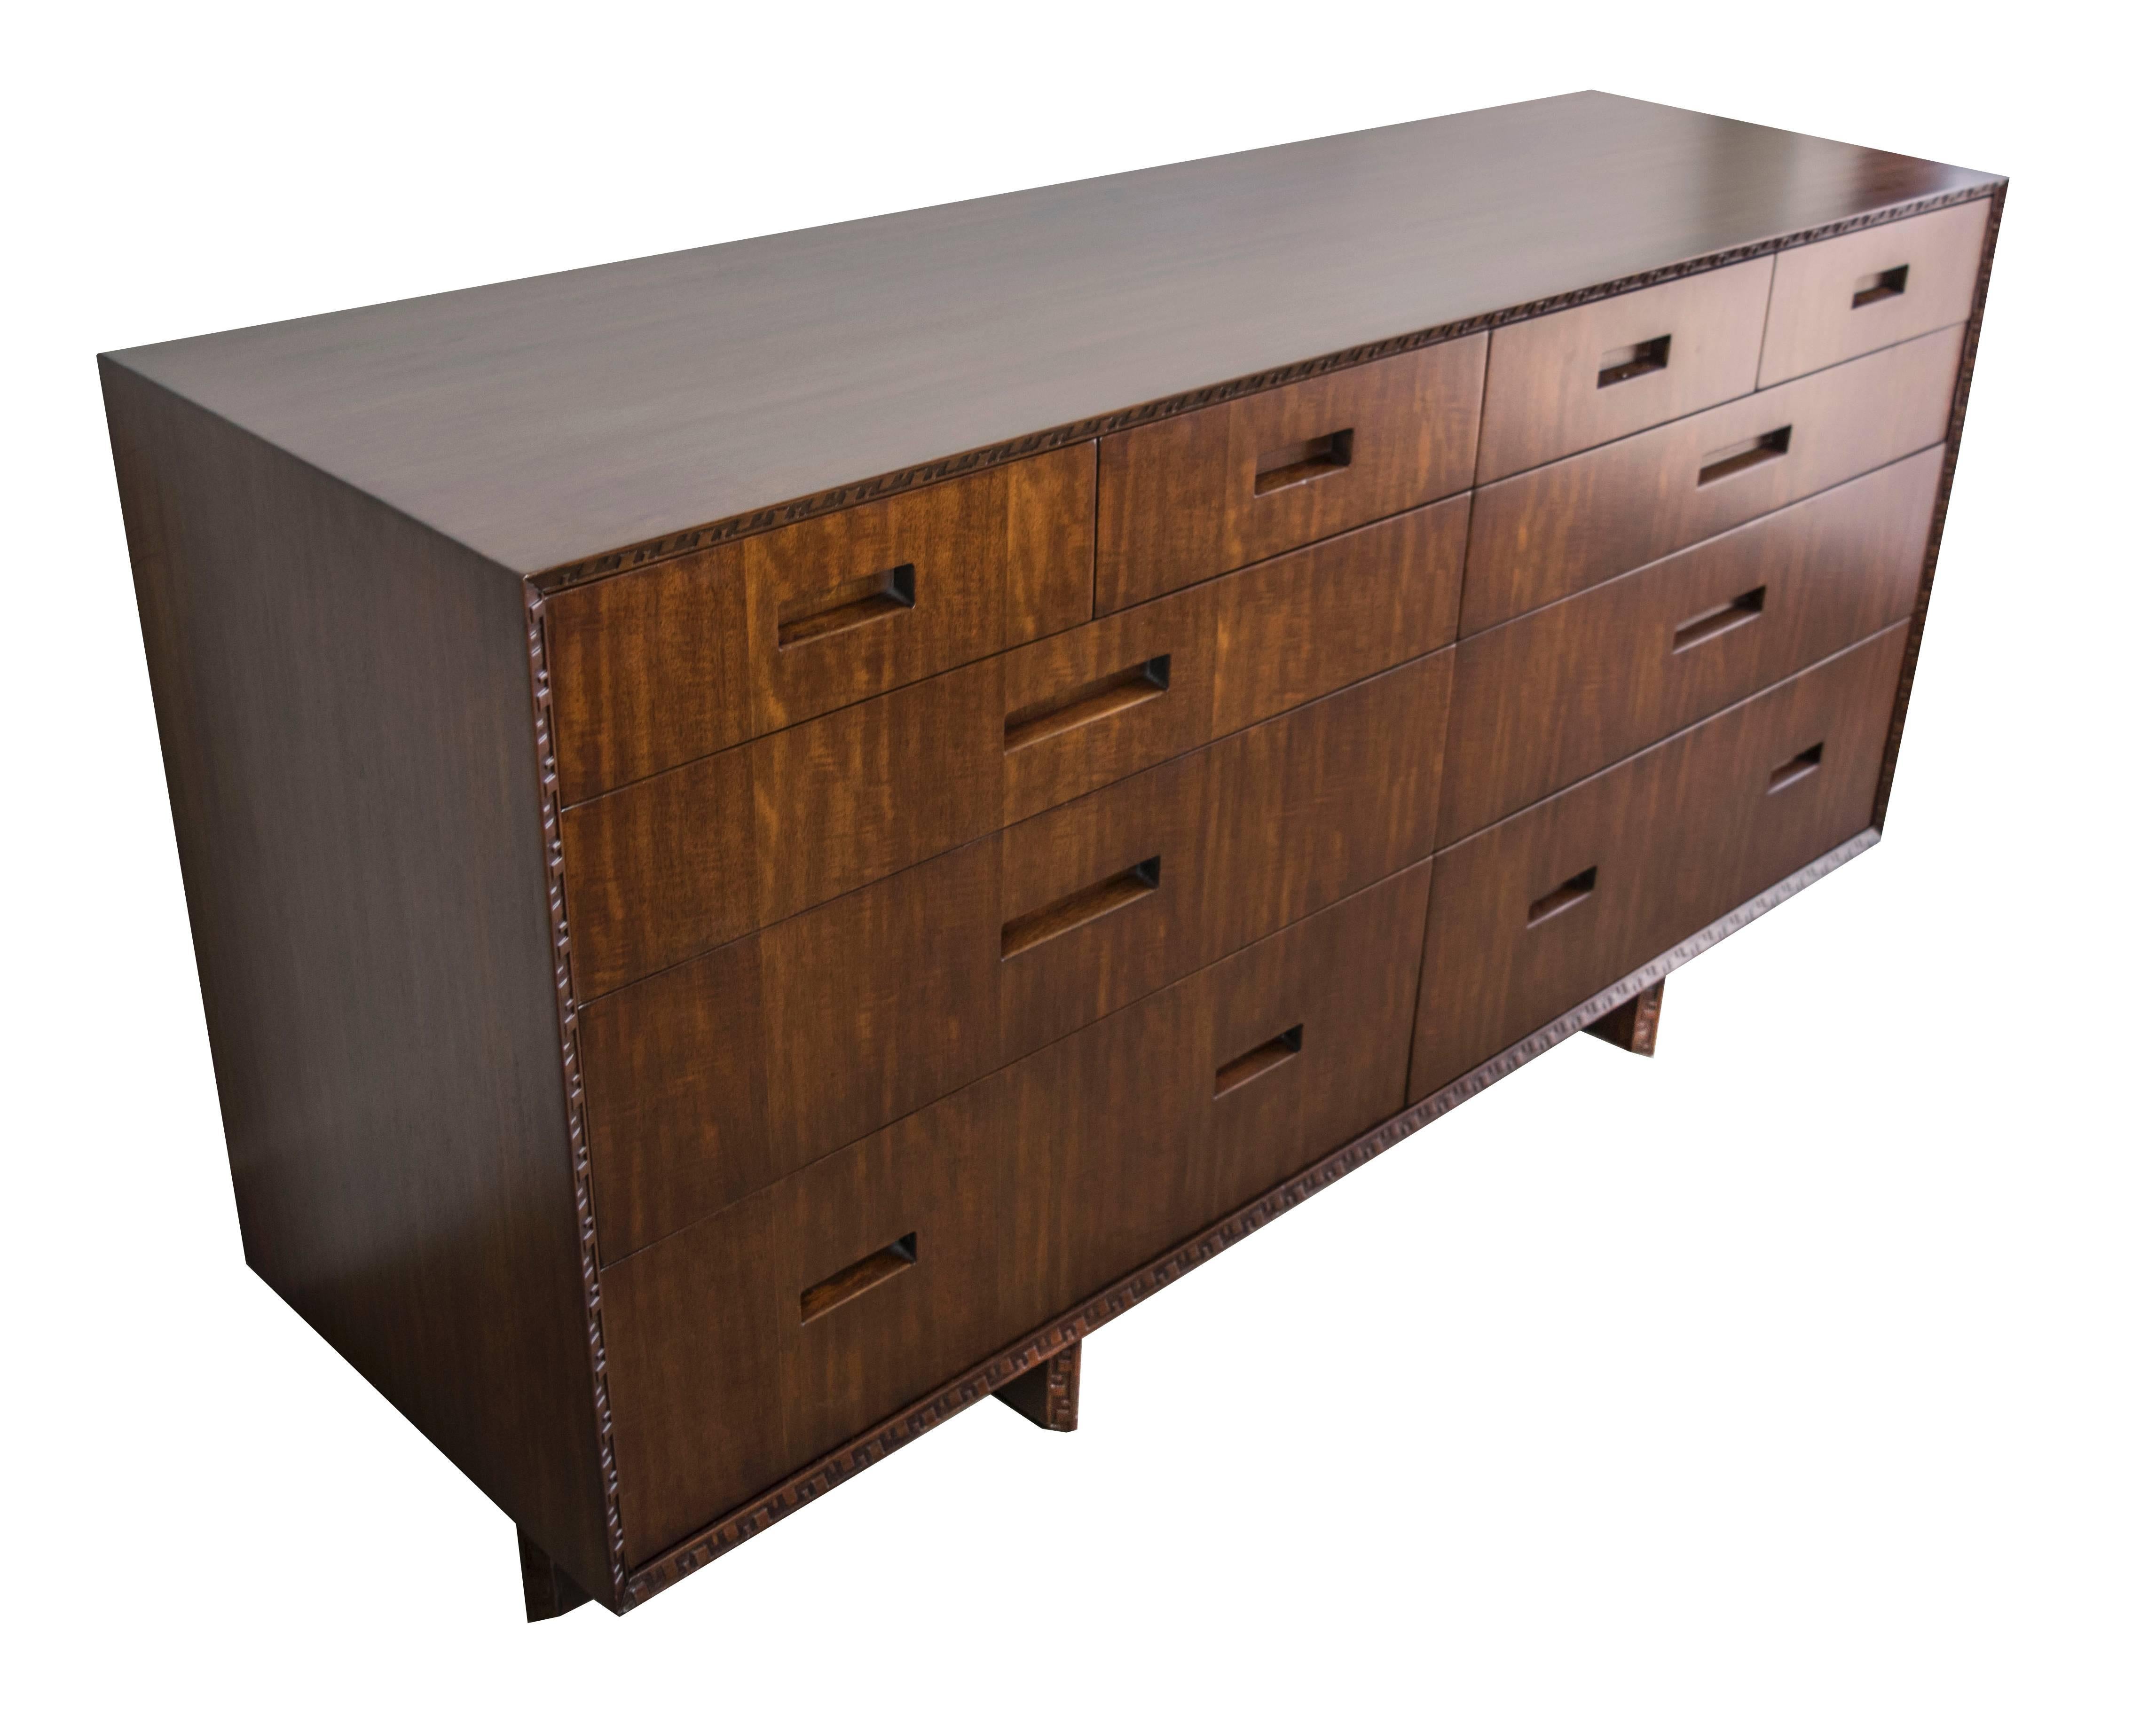 In 1955, Frank Lloyd Wright teamed with the Heritage-Henredon furniture partnership to create a furniture collection originally intended for the American mass market post World War II. This group was the 